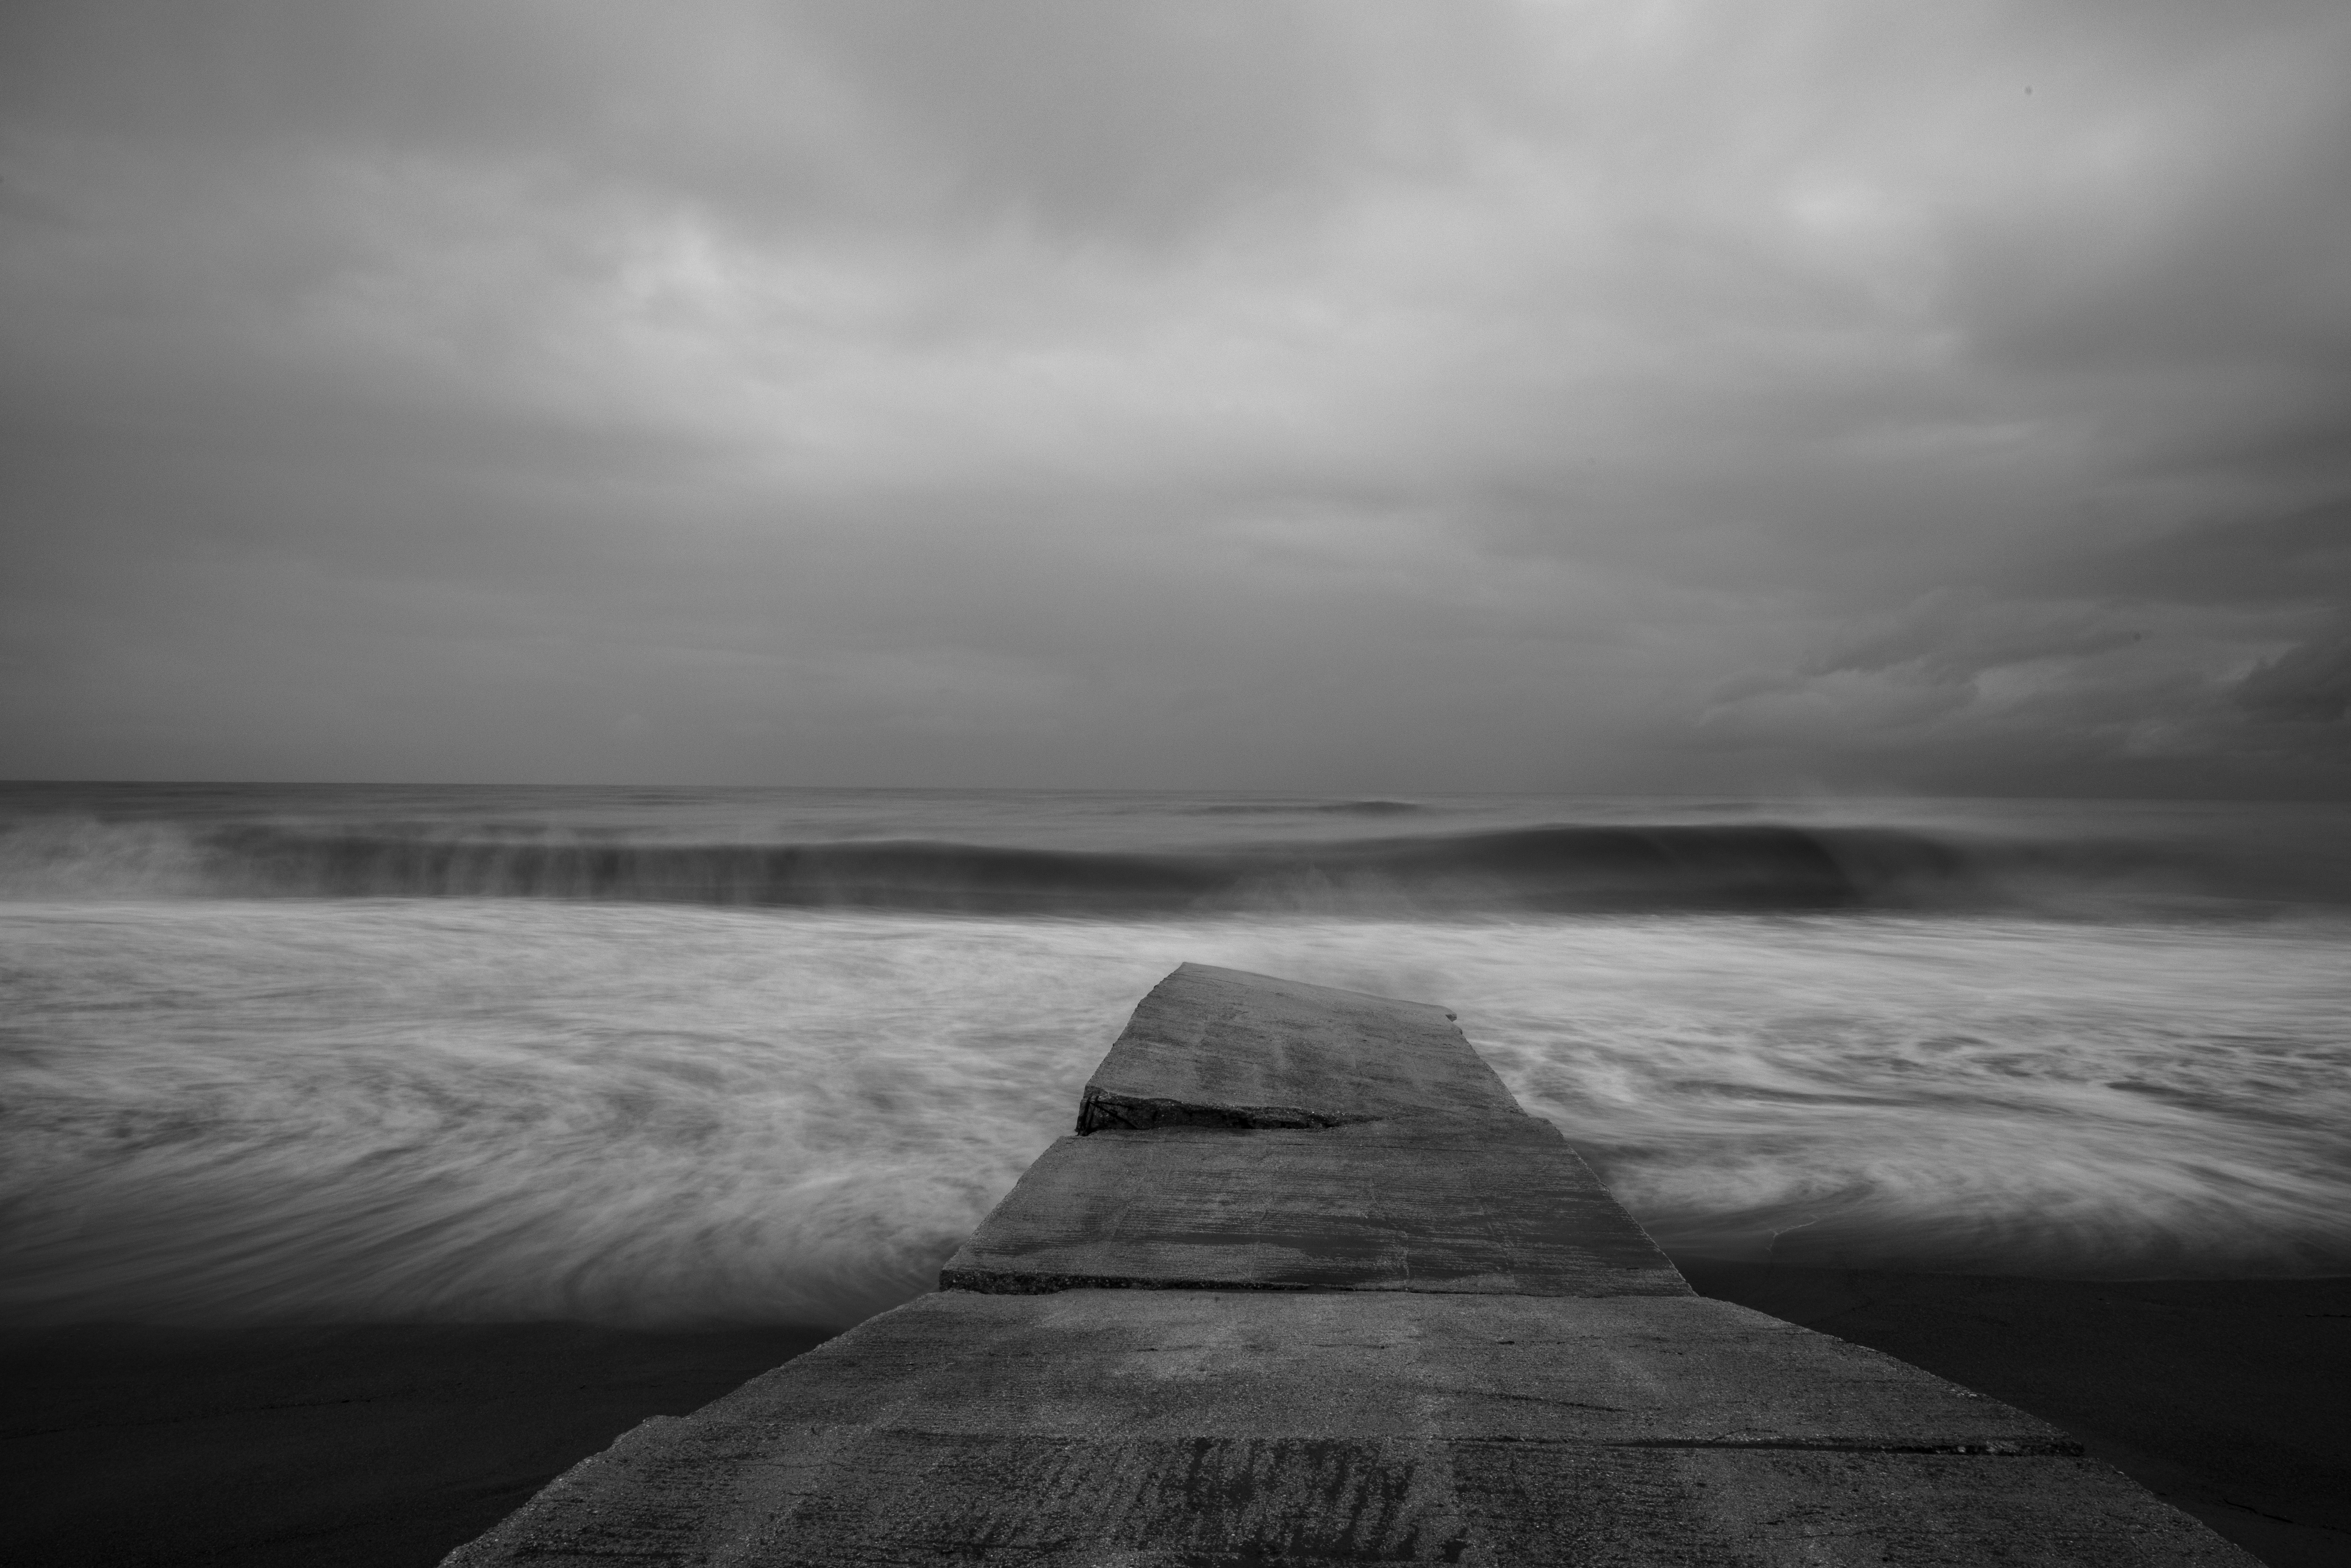 grayscale photo of wooden dock on body of water